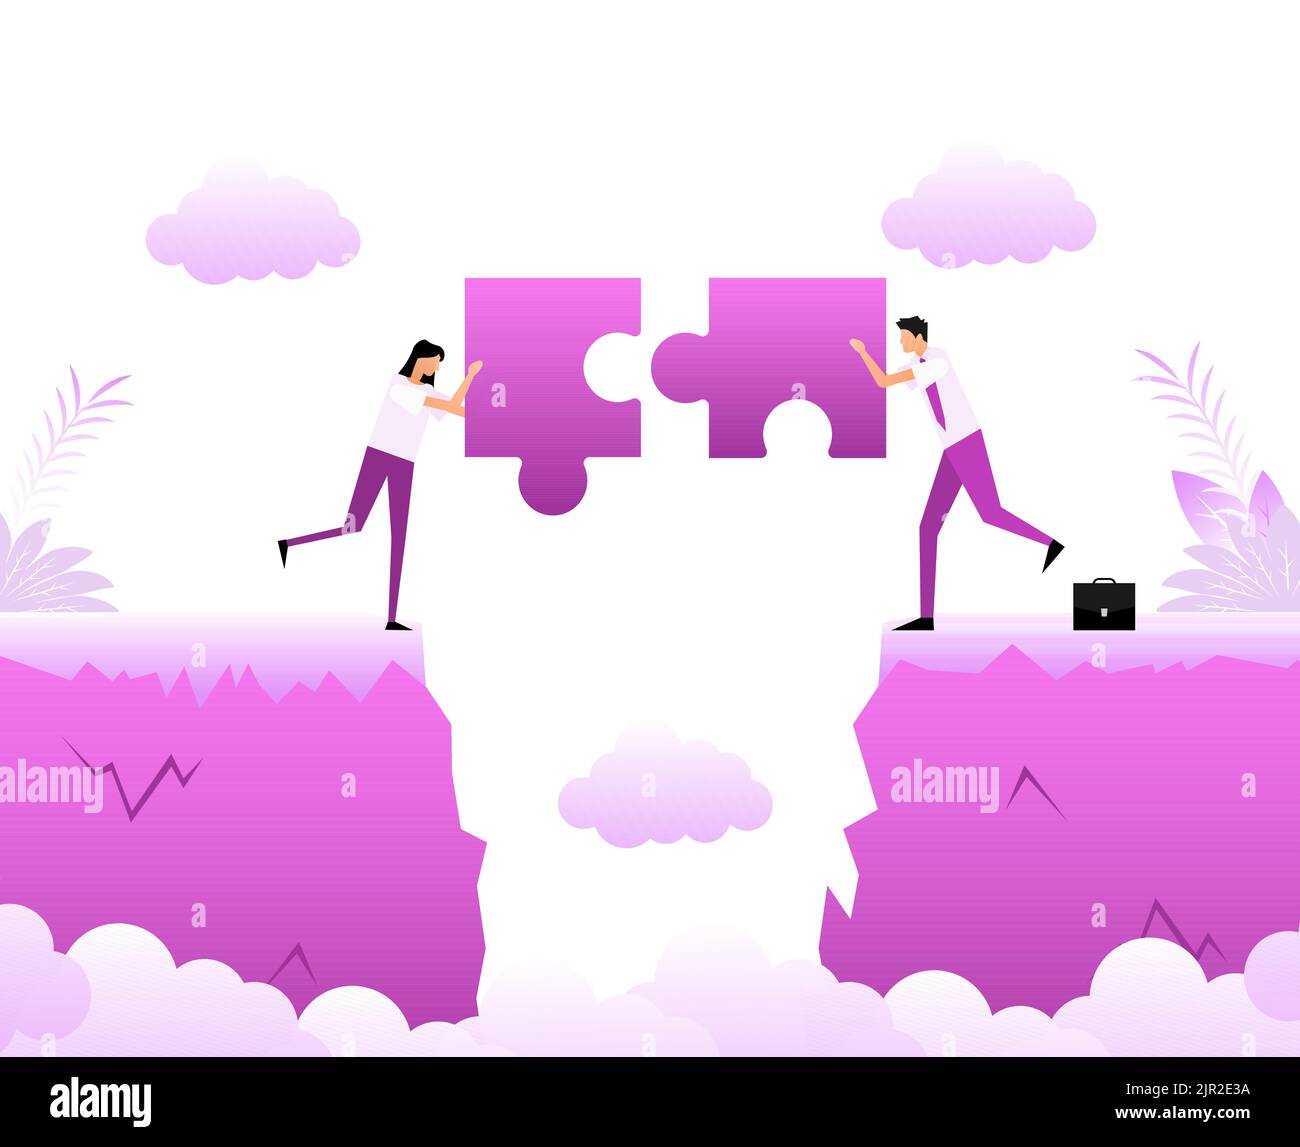 Cartoon icon with people chasm. Business concept. Team concept. Stock Vector